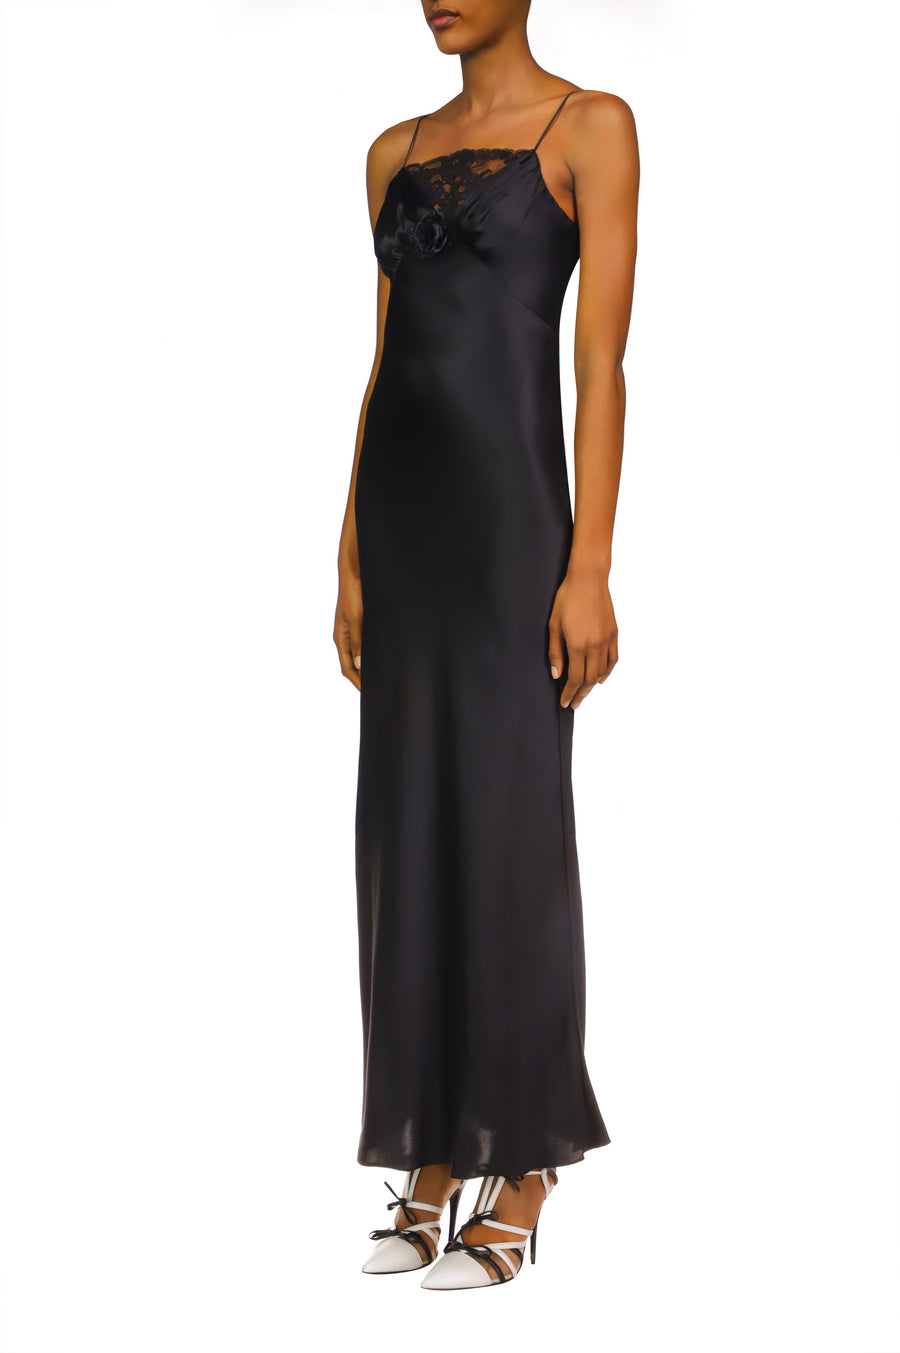 Black Silk Satin Bias Dress With Ruched Bust And Black Lace Detail